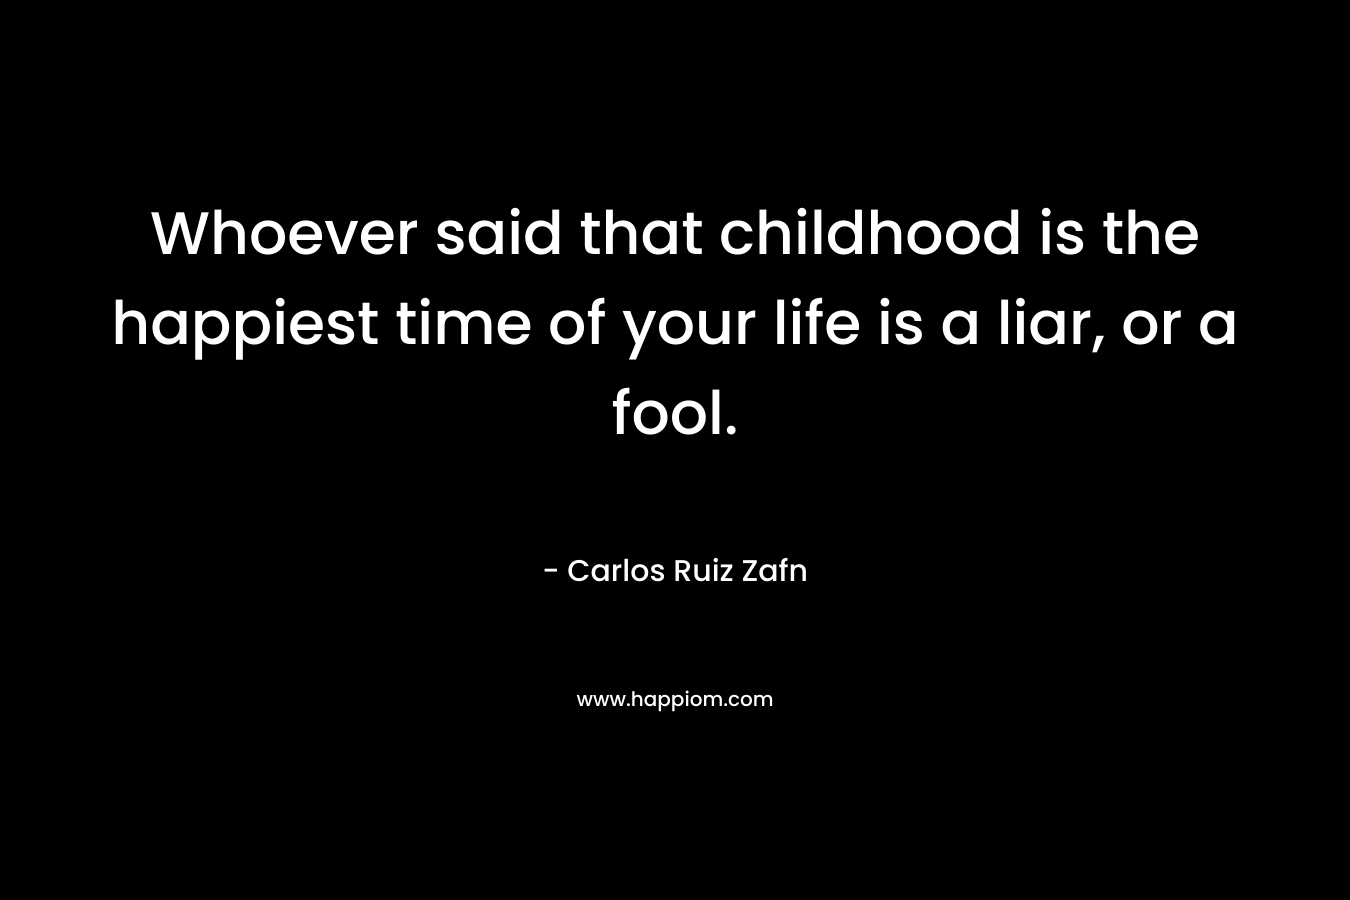 Whoever said that childhood is the happiest time of your life is a liar, or a fool.